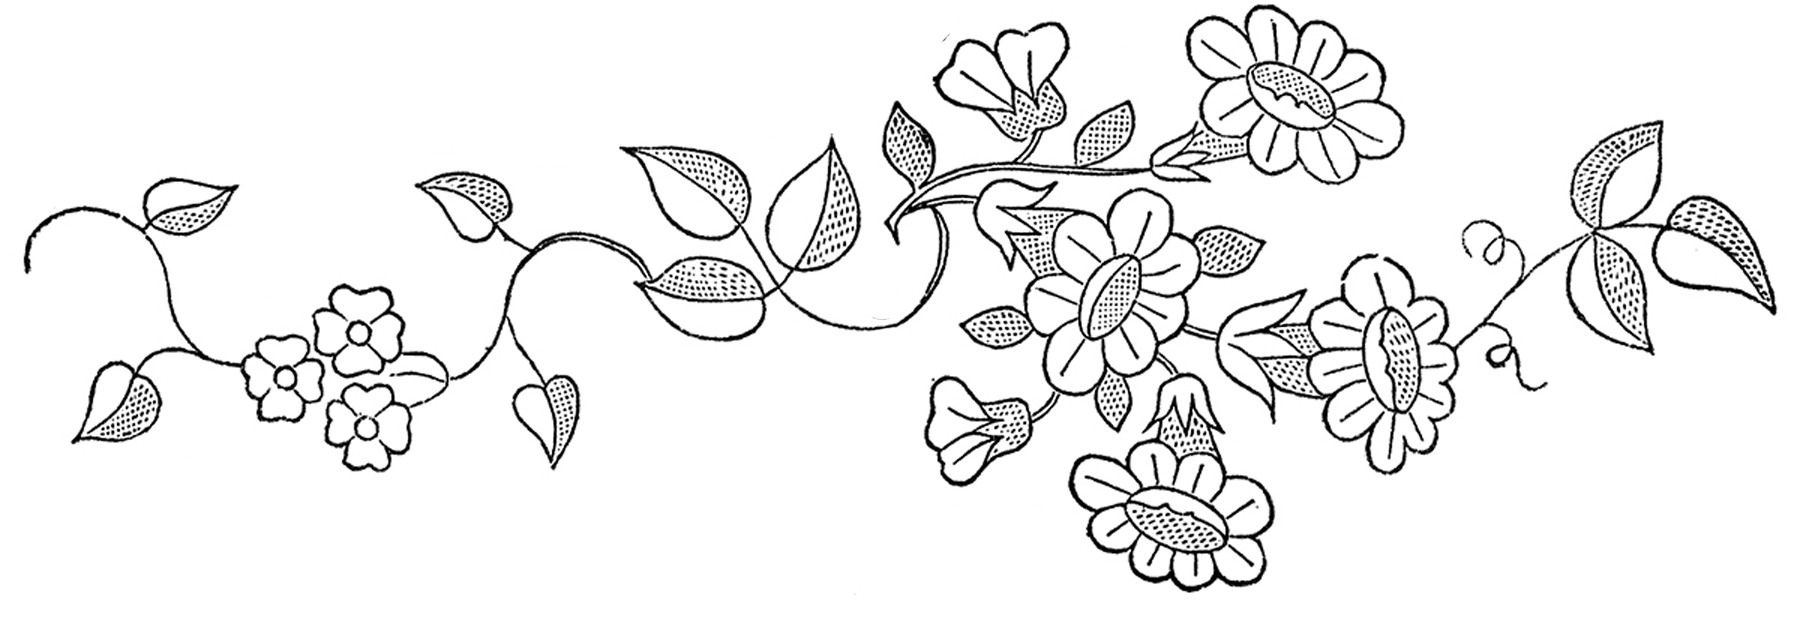 Hand Embroidery Flowers Patterns Hand Embroidery Patterns Digitemb